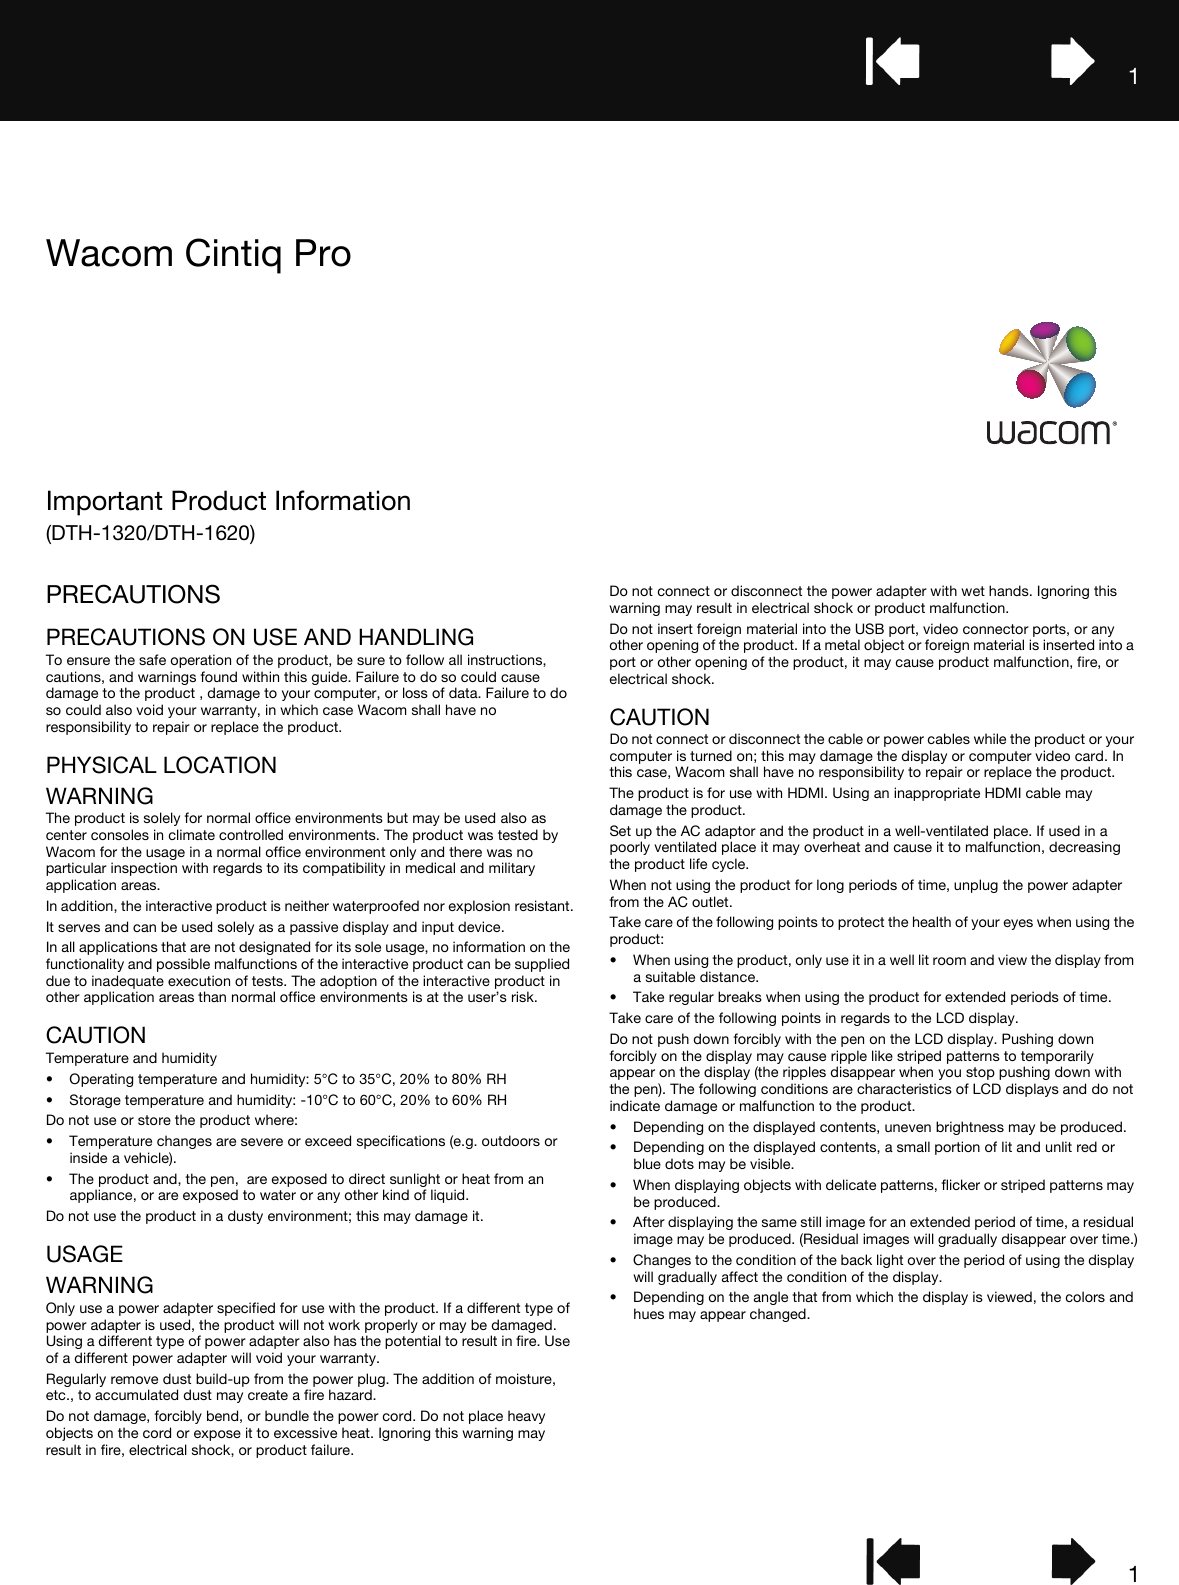 11Important Product Information(DTH-1320/DTH-1620)Wacom Cintiq ProPRECAUTIONSPRECAUTIONS ON USE AND HANDLINGTo ensure the safe operation of the product, be sure to follow all instructions, cautions, and warnings found within this guide. Failure to do so could cause damage to the product , damage to your computer, or loss of data. Failure to do so could also void your warranty, in which case Wacom shall have no responsibility to repair or replace the product.PHYSICAL LOCATIONWARNINGThe product is solely for normal office environments but may be used also as center consoles in climate controlled environments. The product was tested by Wacom for the usage in a normal office environment only and there was no particular inspection with regards to its compatibility in medical and military application areas.In addition, the interactive product is neither waterproofed nor explosion resistant.It serves and can be used solely as a passive display and input device.In all applications that are not designated for its sole usage, no information on the functionality and possible malfunctions of the interactive product can be supplied due to inadequate execution of tests. The adoption of the interactive product in other application areas than normal office environments is at the user’s risk.CAUTIONTemperature and humidity• Operating temperature and humidity: 5°C to 35°C, 20% to 80% RH• Storage temperature and humidity: -10°C to 60°C, 20% to 60% RHDo not use or store the product where:• Temperature changes are severe or exceed specifications (e.g. outdoors or inside a vehicle).• The product and, the pen,  are exposed to direct sunlight or heat from an appliance, or are exposed to water or any other kind of liquid.Do not use the product in a dusty environment; this may damage it.USAGEWARNINGOnly use a power adapter specified for use with the product. If a different type of power adapter is used, the product will not work properly or may be damaged. Using a different type of power adapter also has the potential to result in fire. Use of a different power adapter will void your warranty.Regularly remove dust build-up from the power plug. The addition of moisture, etc., to accumulated dust may create a fire hazard.Do not damage, forcibly bend, or bundle the power cord. Do not place heavy objects on the cord or expose it to excessive heat. Ignoring this warning may result in fire, electrical shock, or product failure.Do not connect or disconnect the power adapter with wet hands. Ignoring this warning may result in electrical shock or product malfunction.Do not insert foreign material into the USB port, video connector ports, or any other opening of the product. If a metal object or foreign material is inserted into a port or other opening of the product, it may cause product malfunction, fire, or electrical shock.CAUTIONDo not connect or disconnect the cable or power cables while the product or your computer is turned on; this may damage the display or computer video card. In this case, Wacom shall have no responsibility to repair or replace the product.The product is for use with HDMI. Using an inappropriate HDMI cable may damage the product.Set up the AC adaptor and the product in a well-ventilated place. If used in a poorly ventilated place it may overheat and cause it to malfunction, decreasing the product life cycle.When not using the product for long periods of time, unplug the power adapter from the AC outlet.Take care of the following points to protect the health of your eyes when using the product:• When using the product, only use it in a well lit room and view the display from a suitable distance.• Take regular breaks when using the product for extended periods of time.Take care of the following points in regards to the LCD display.Do not push down forcibly with the pen on the LCD display. Pushing down forcibly on the display may cause ripple like striped patterns to temporarily appear on the display (the ripples disappear when you stop pushing down with the pen). The following conditions are characteristics of LCD displays and do not indicate damage or malfunction to the product.• Depending on the displayed contents, uneven brightness may be produced.• Depending on the displayed contents, a small portion of lit and unlit red or blue dots may be visible.• When displaying objects with delicate patterns, flicker or striped patterns may be produced.• After displaying the same still image for an extended period of time, a residual image may be produced. (Residual images will gradually disappear over time.)• Changes to the condition of the back light over the period of using the display will gradually affect the condition of the display.• Depending on the angle that from which the display is viewed, the colors and hues may appear changed.